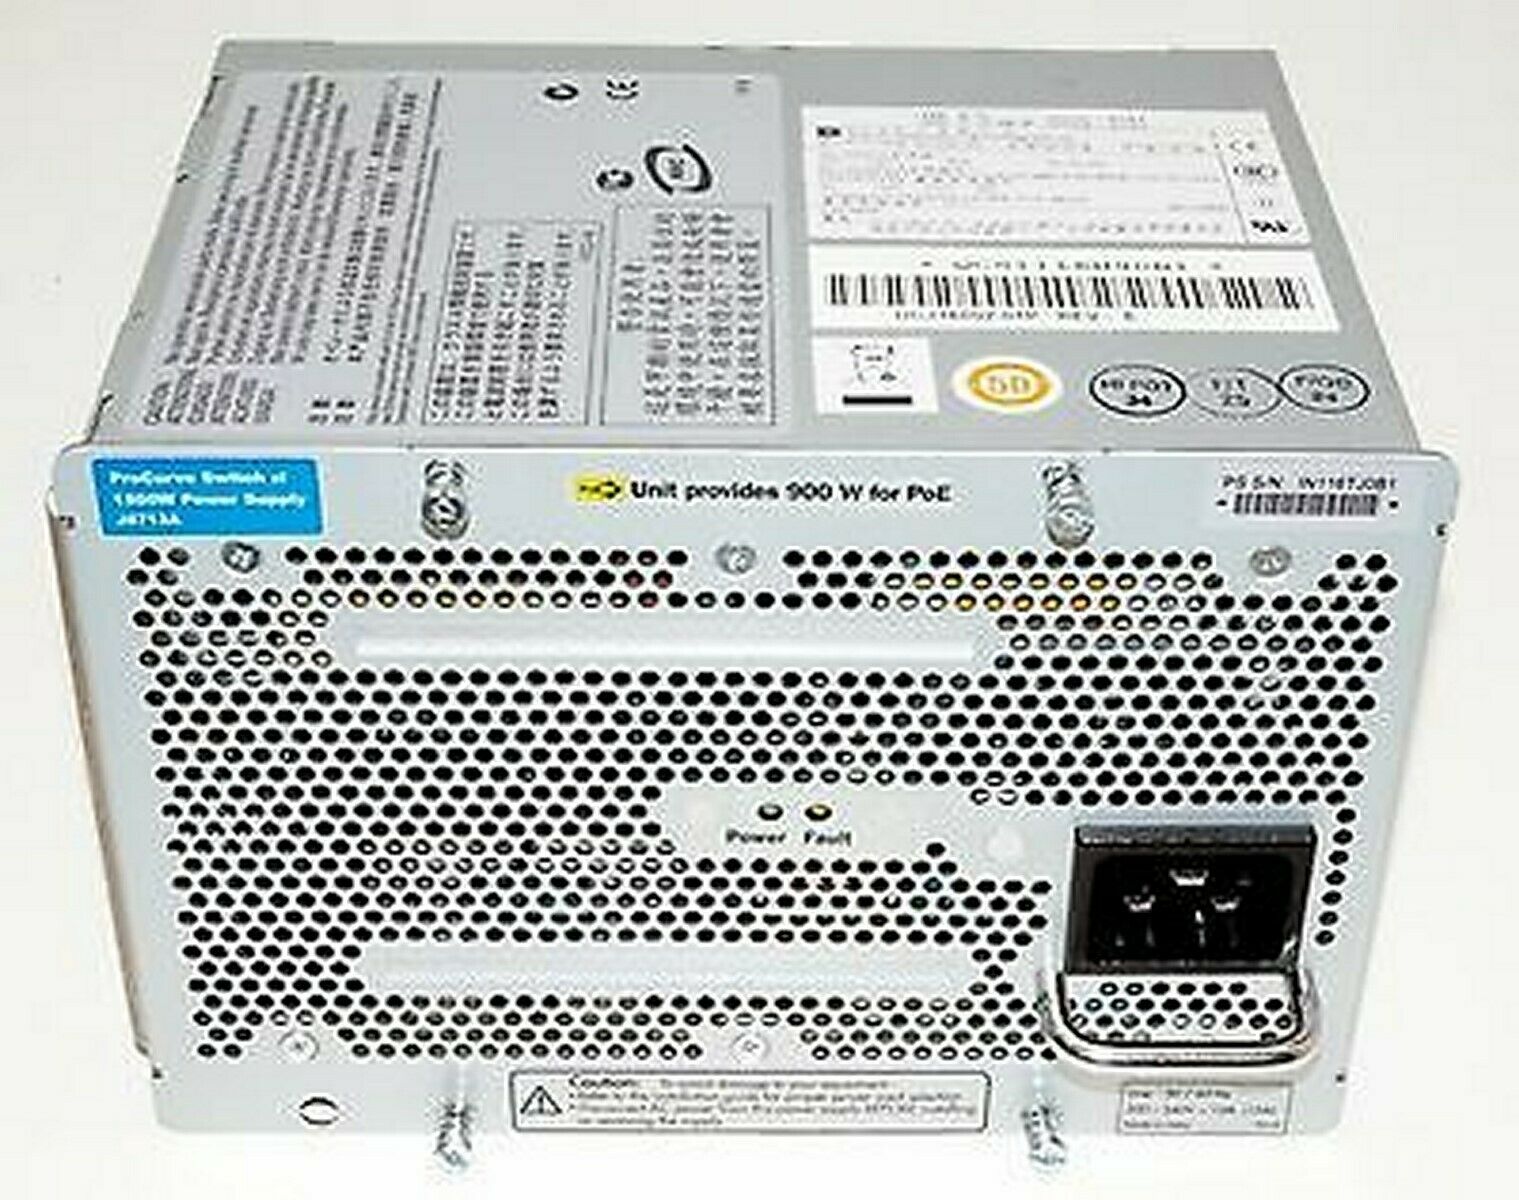 Power Supply Hp J8713a 1500w Poe To The Hp Series Zl